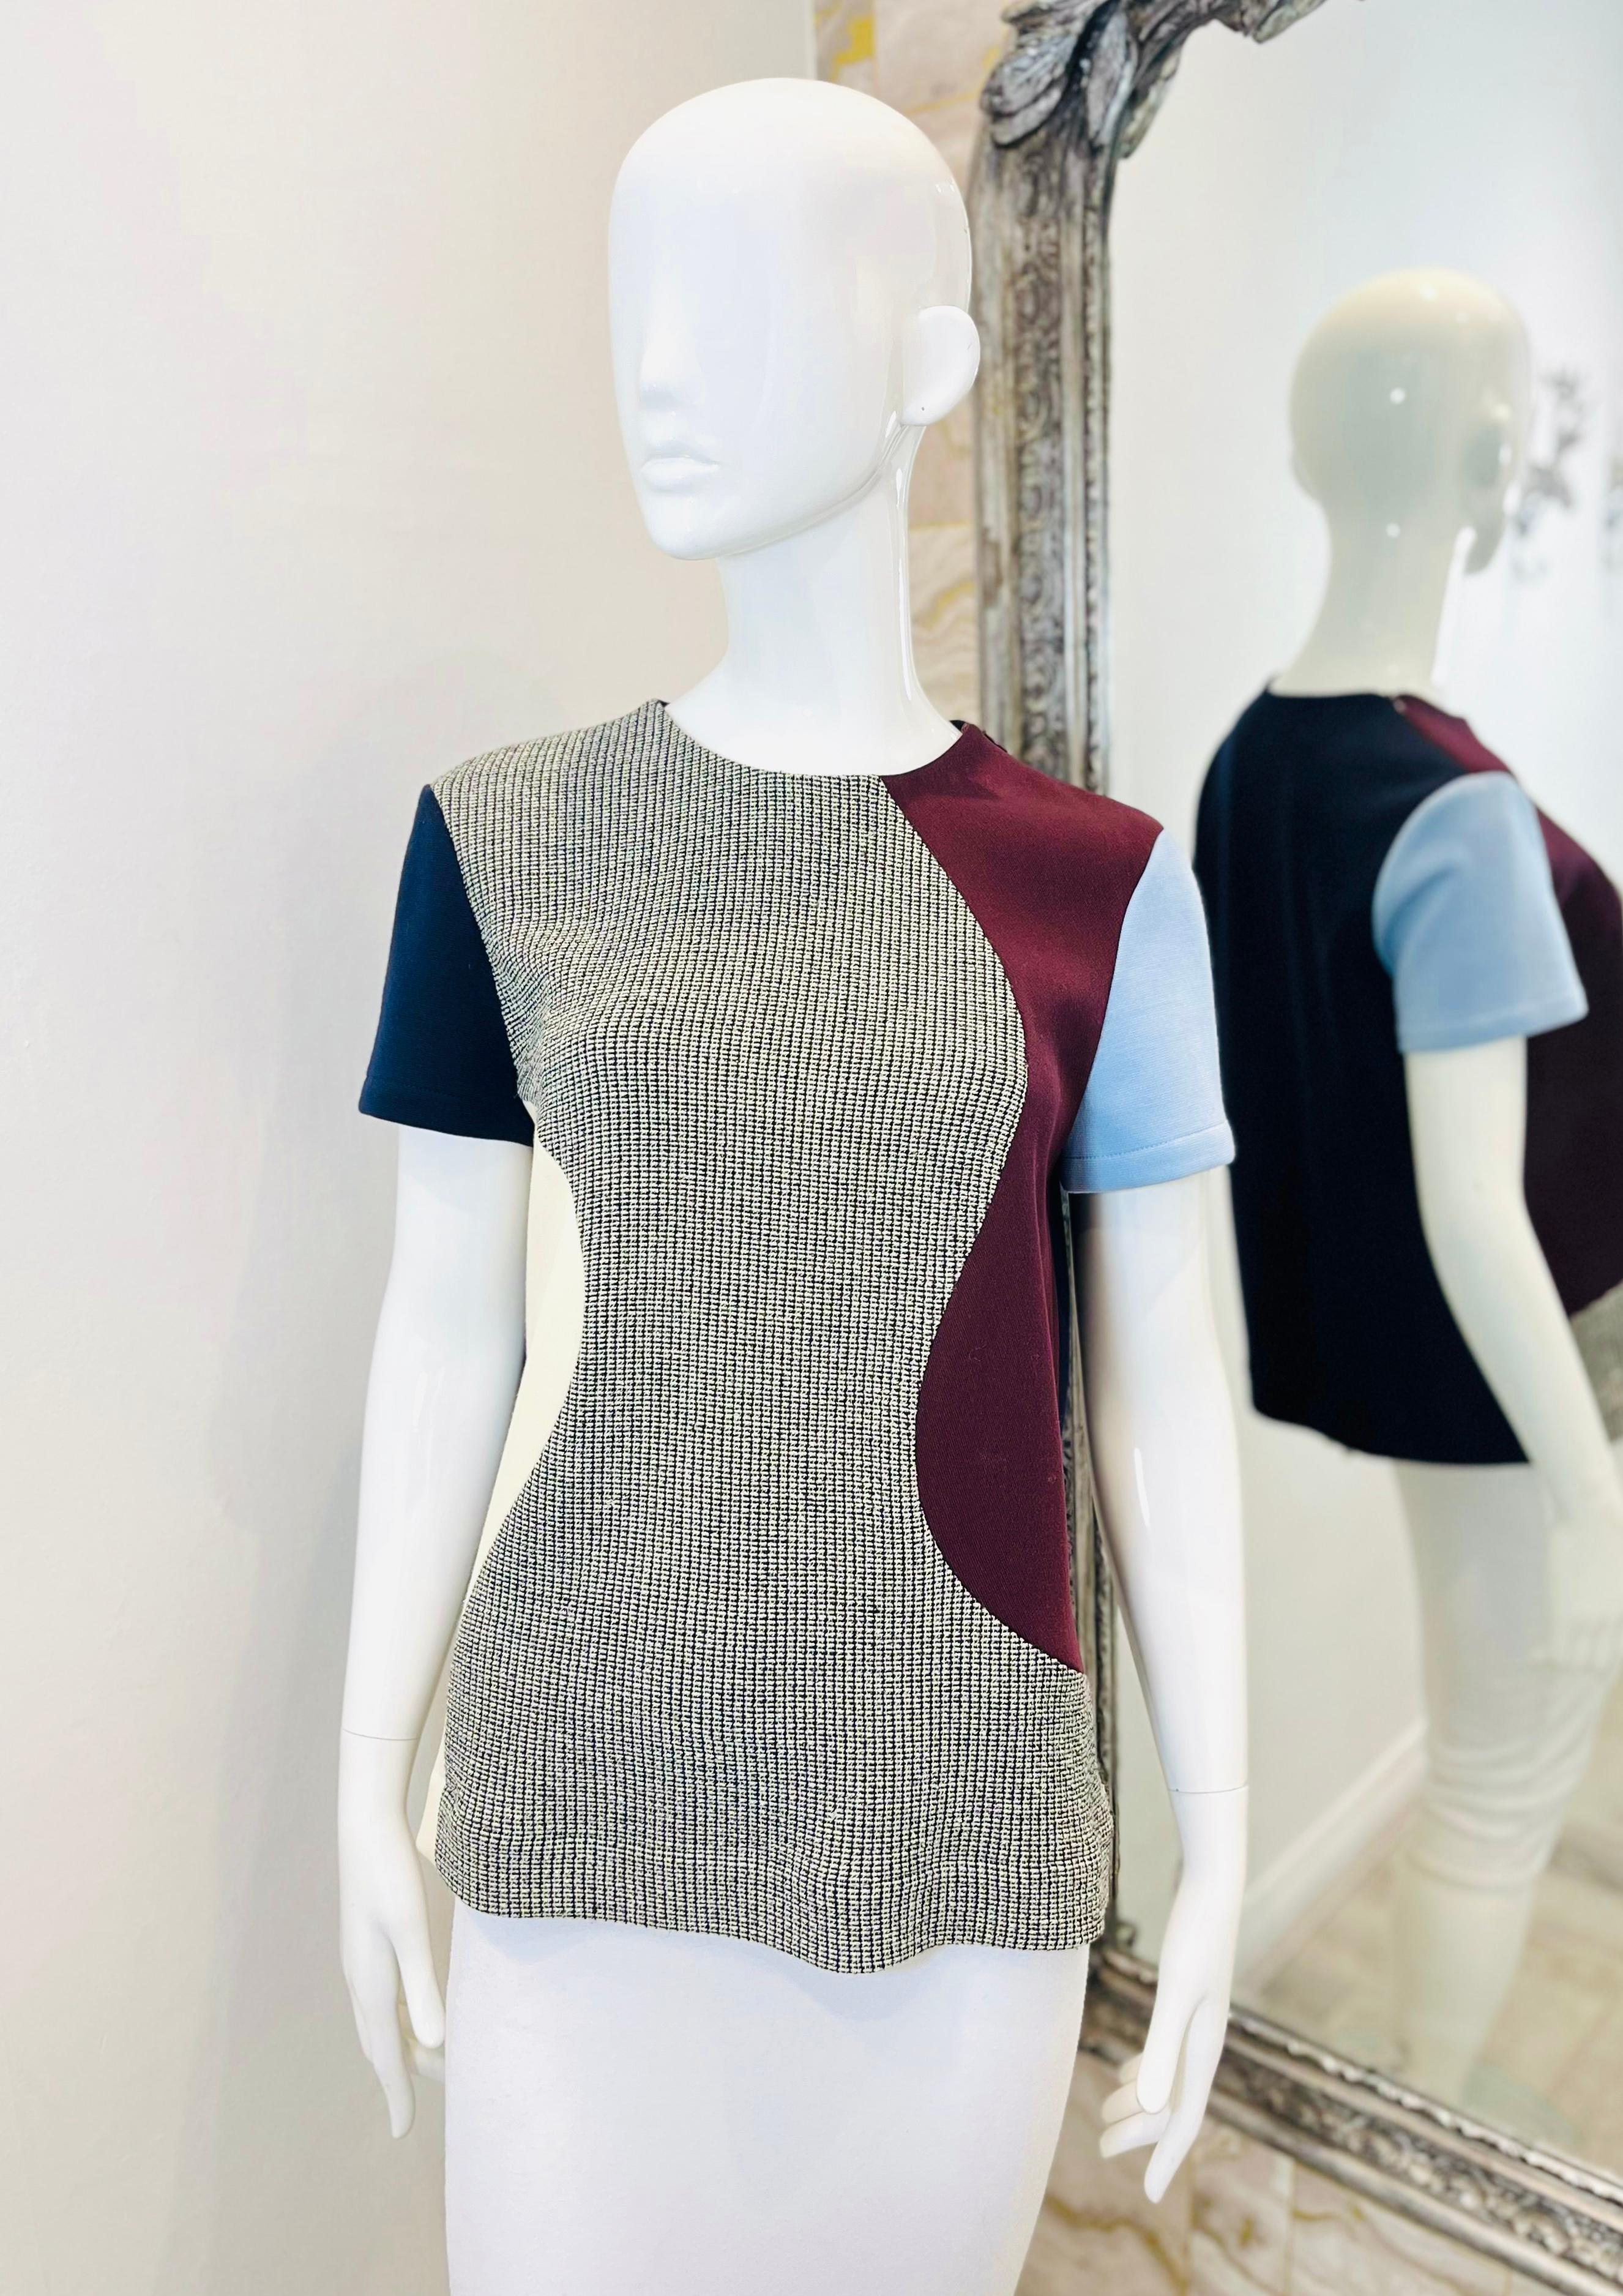 Victoria Beckham Wool Blend Panelled Top

Multicoloured blouse in colour block panelled design styled with multi texture composition.

Featuring crew neckline, short sleeves and straight-cut.

Size – 14UK

Condition – Good (Two minor